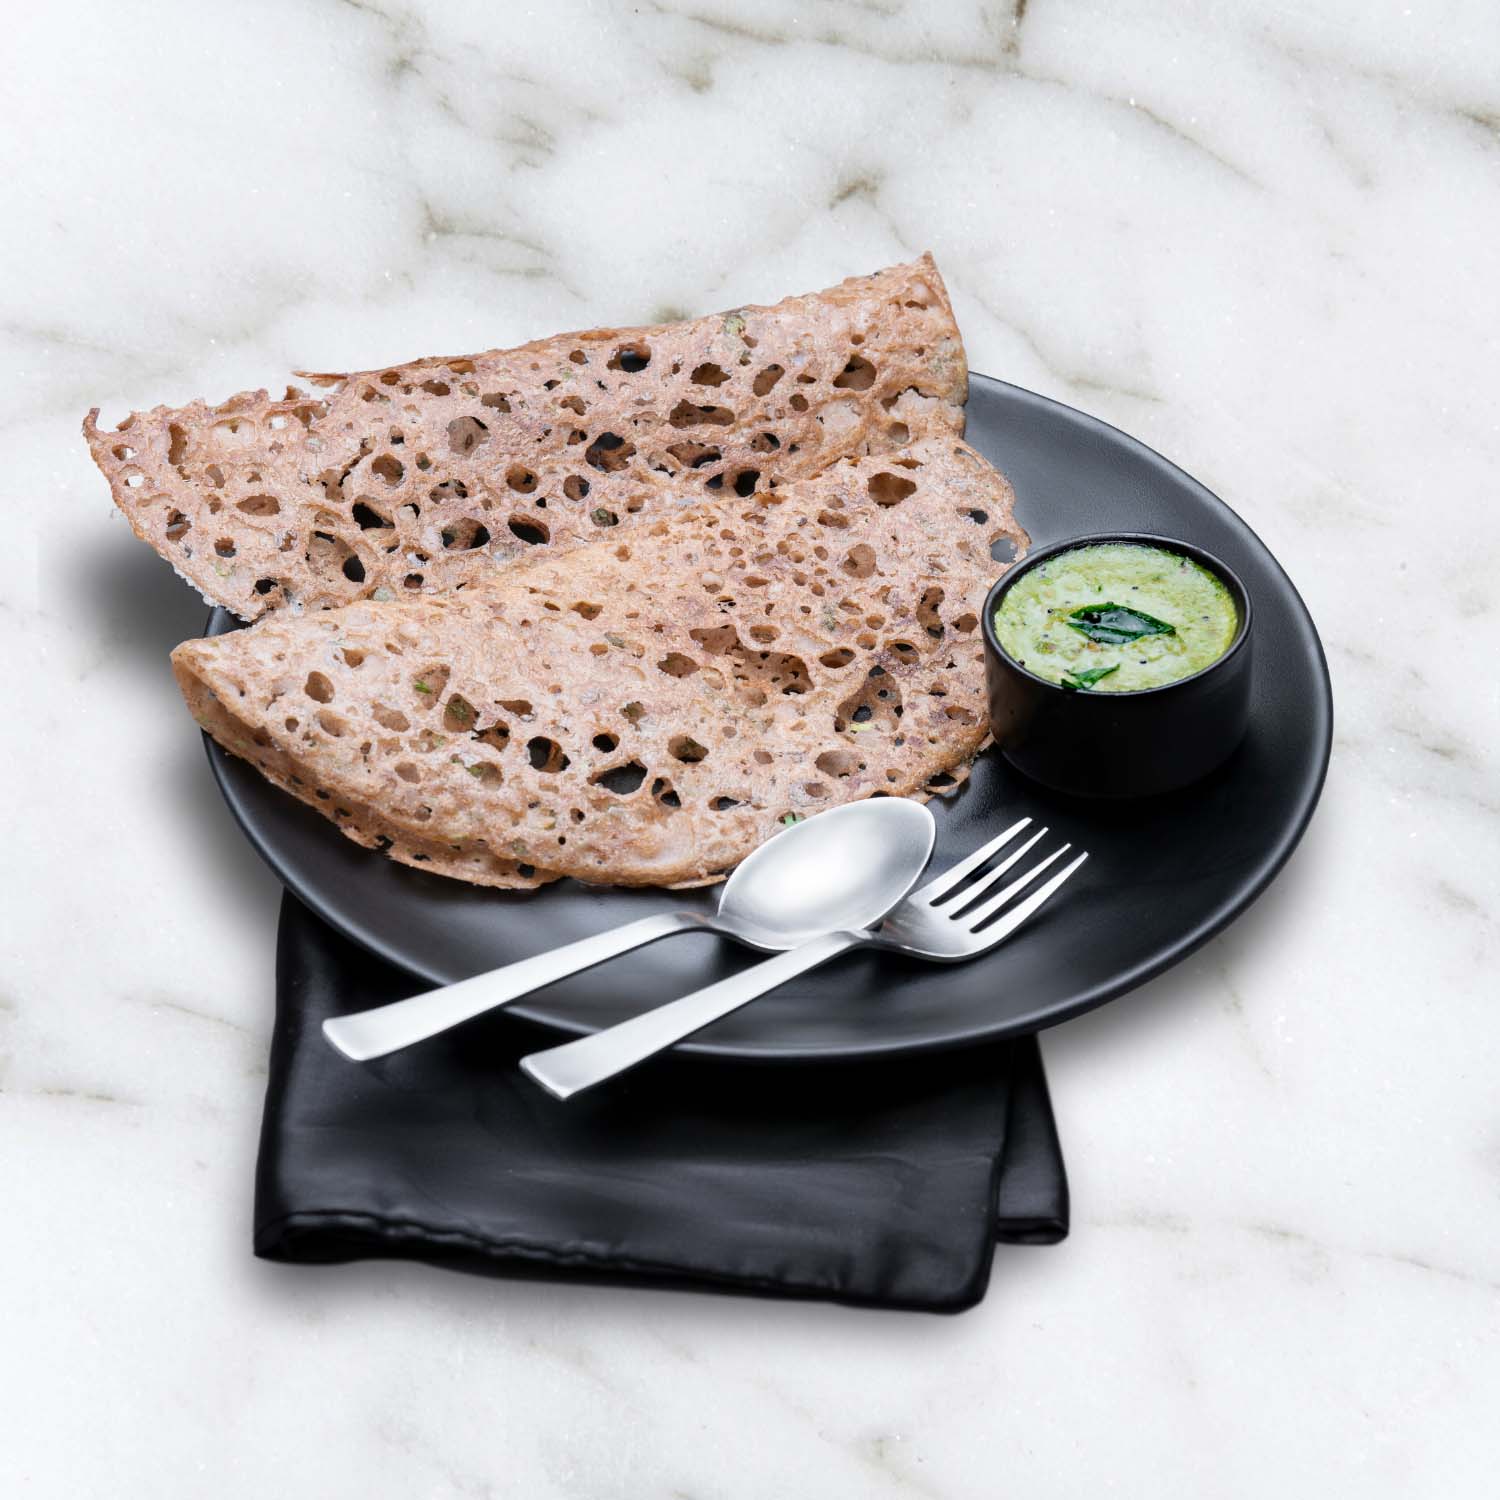 Millet Amma’s Millet Rava Dosa Mix- Who doesn’t love crispy Rava Dosa?  Try our yummy Organic Ragi Millet Idli Dosa Batter for a yummy and healthy breakfast.  With more than 65% millet content, Millet Amma’s Millet Rava Dosa Mix is one of the best choices for a healthy breakfast. It is suitable for all ages.